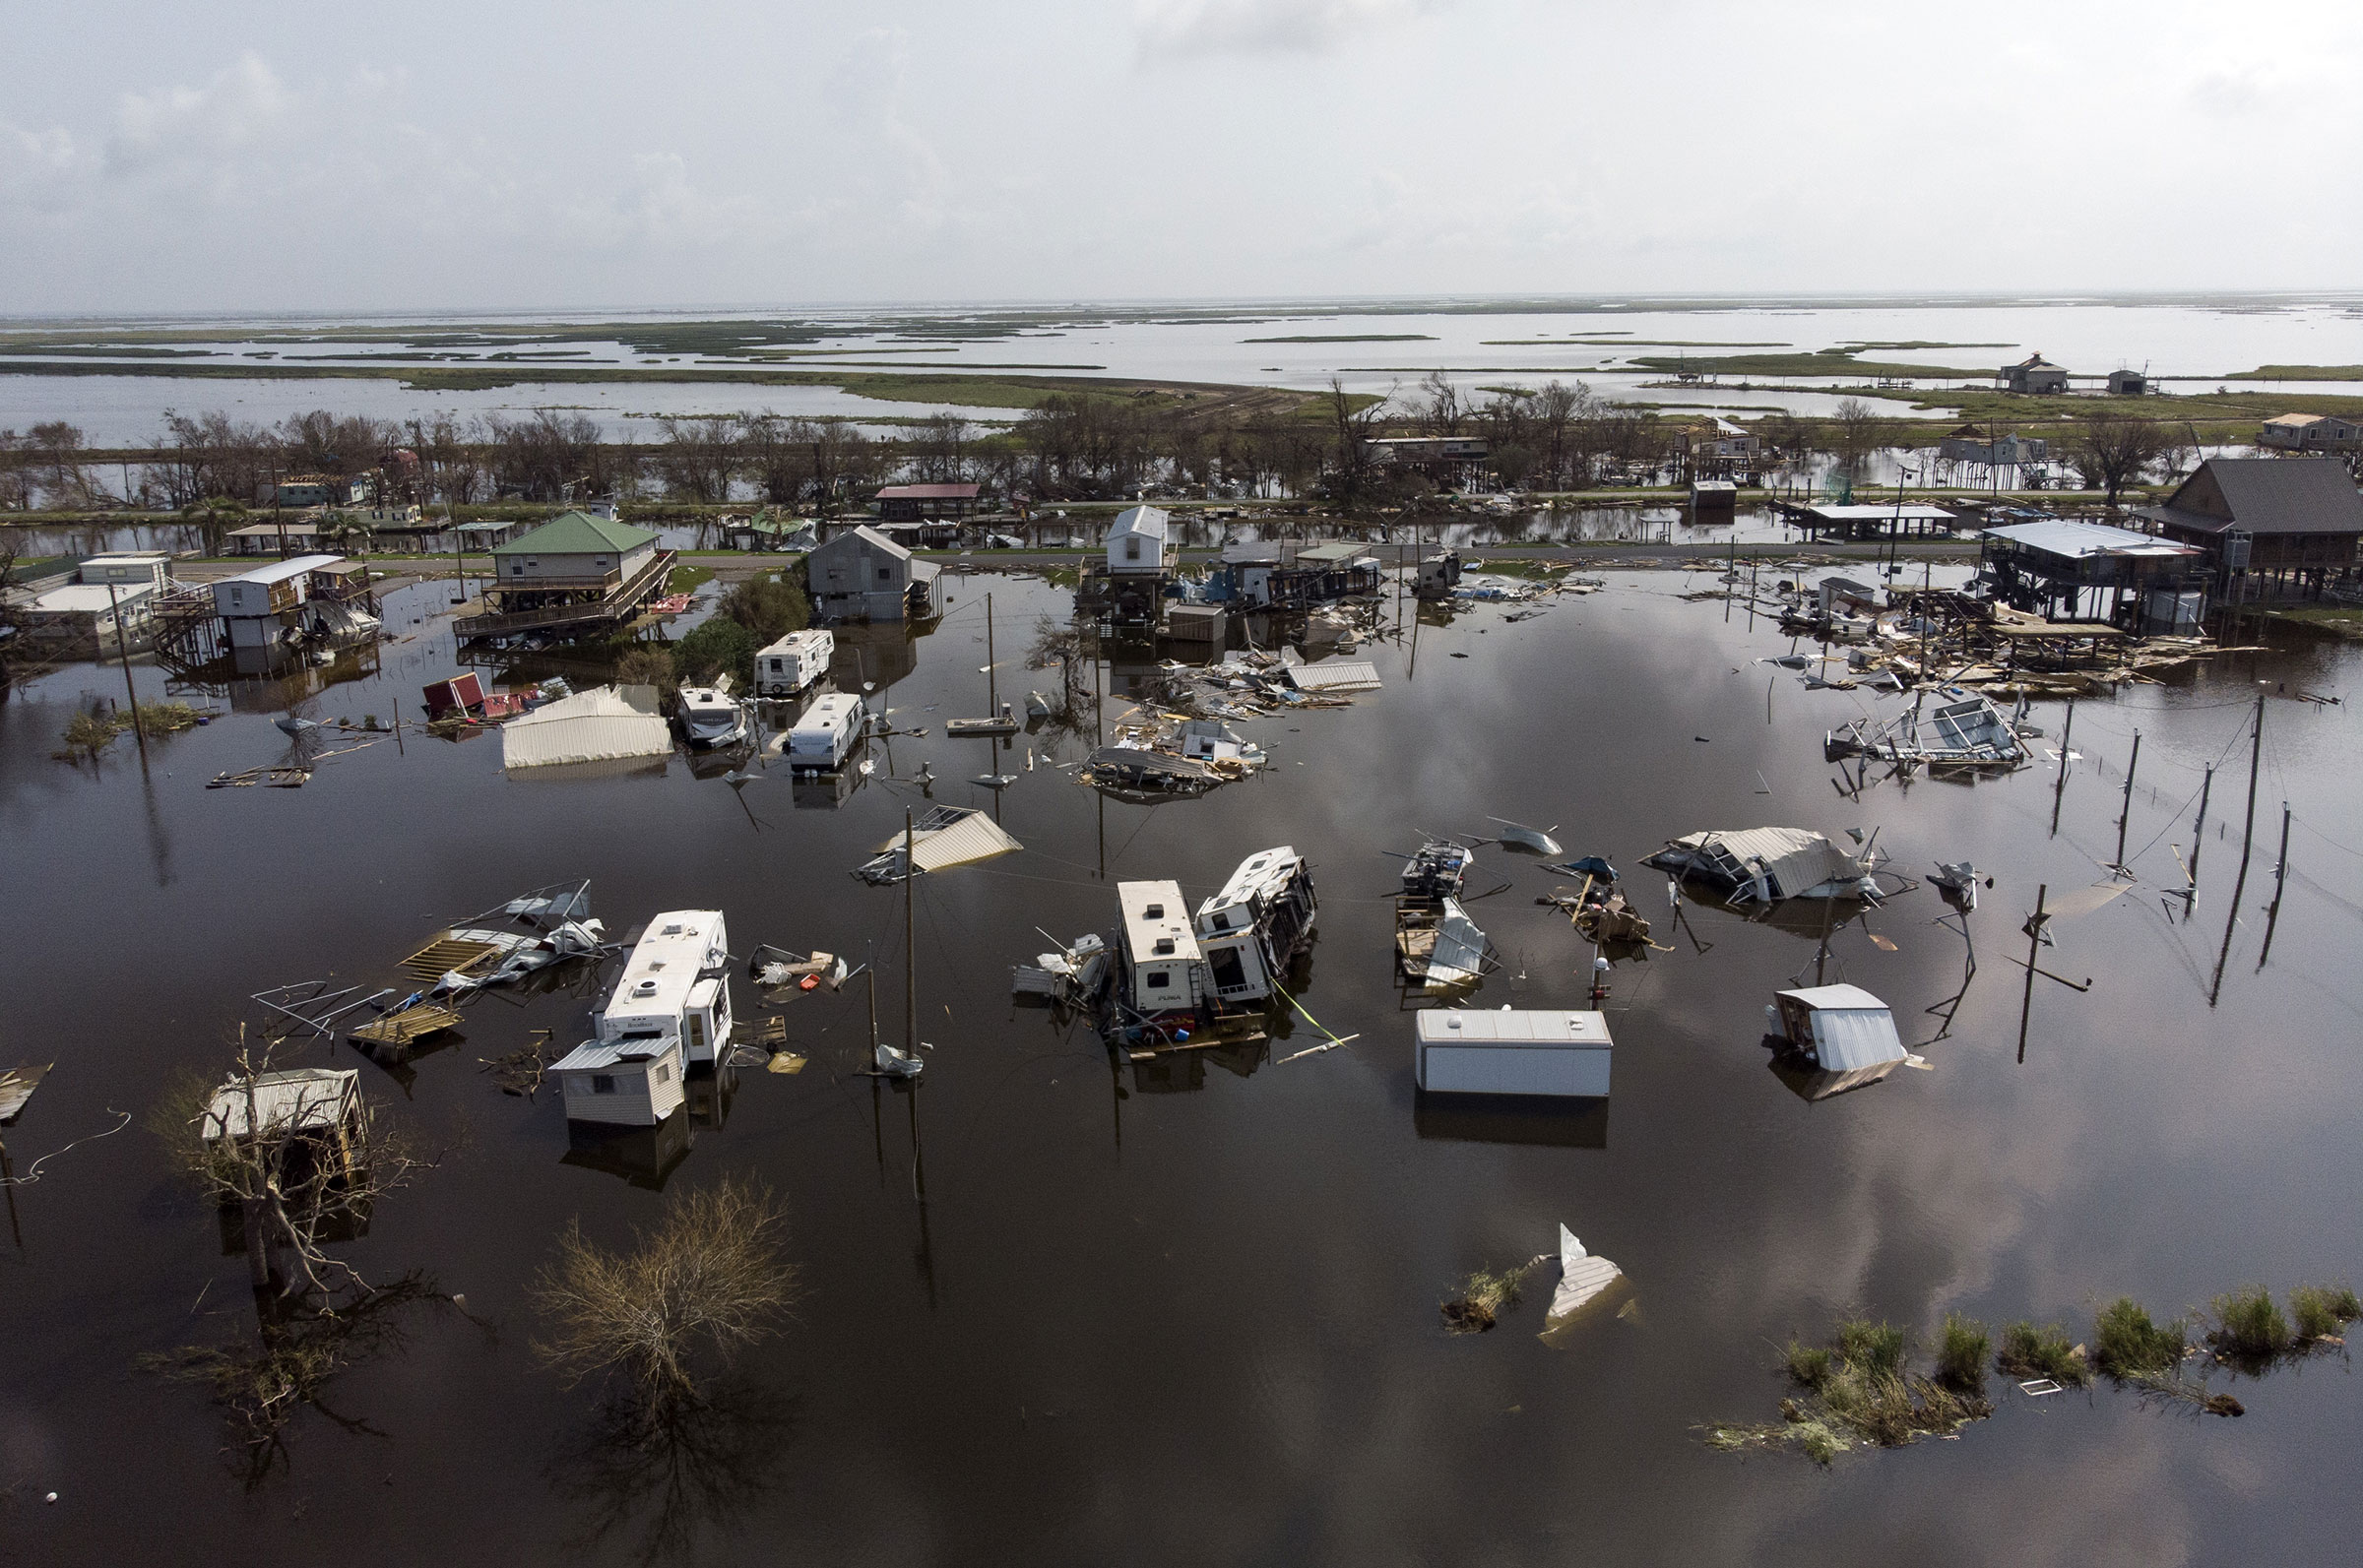 Damaged homes in floodwater after Hurricane Ida in Pointe-Aux-Chenes, Louisiana, U.S., on Thursday, Sept. 2, 2021. (Mark Felix—Bloomberg/Getty Images)